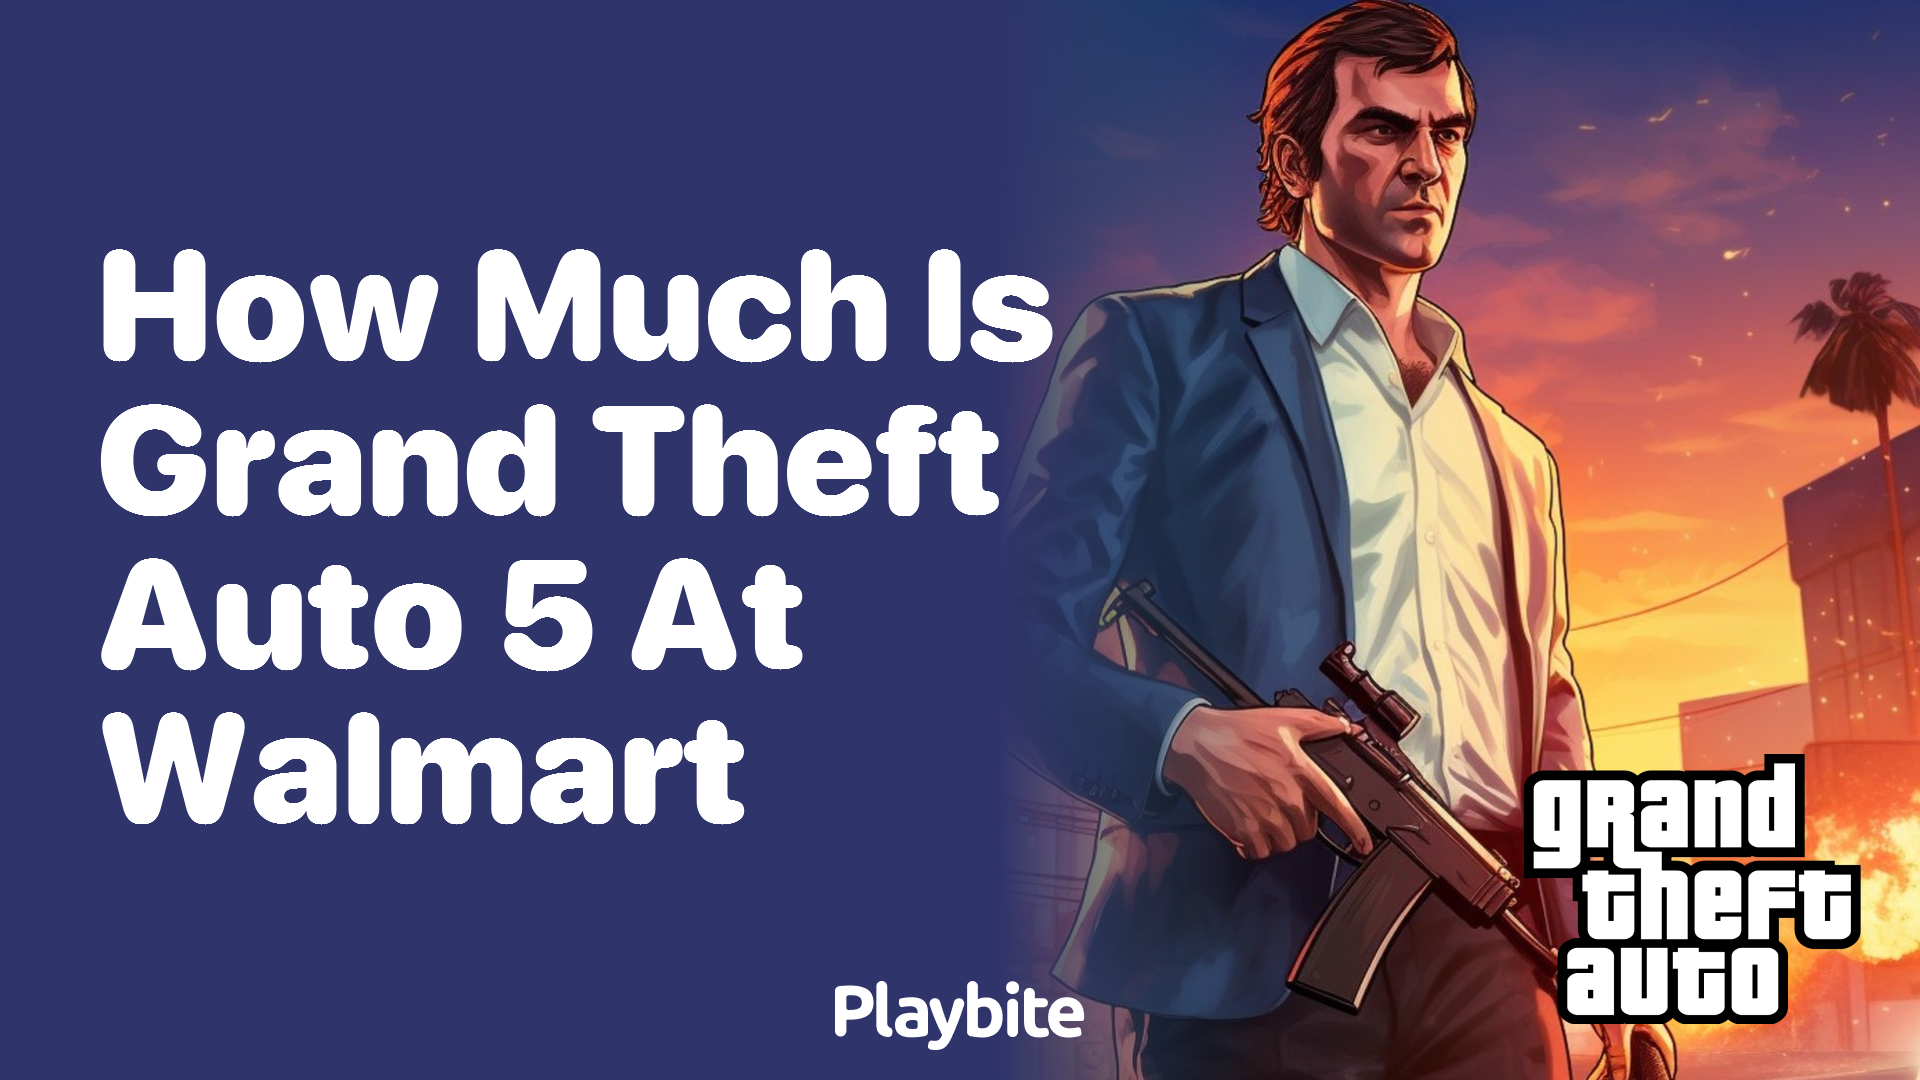 How much is Grand Theft Auto 5 at Walmart?